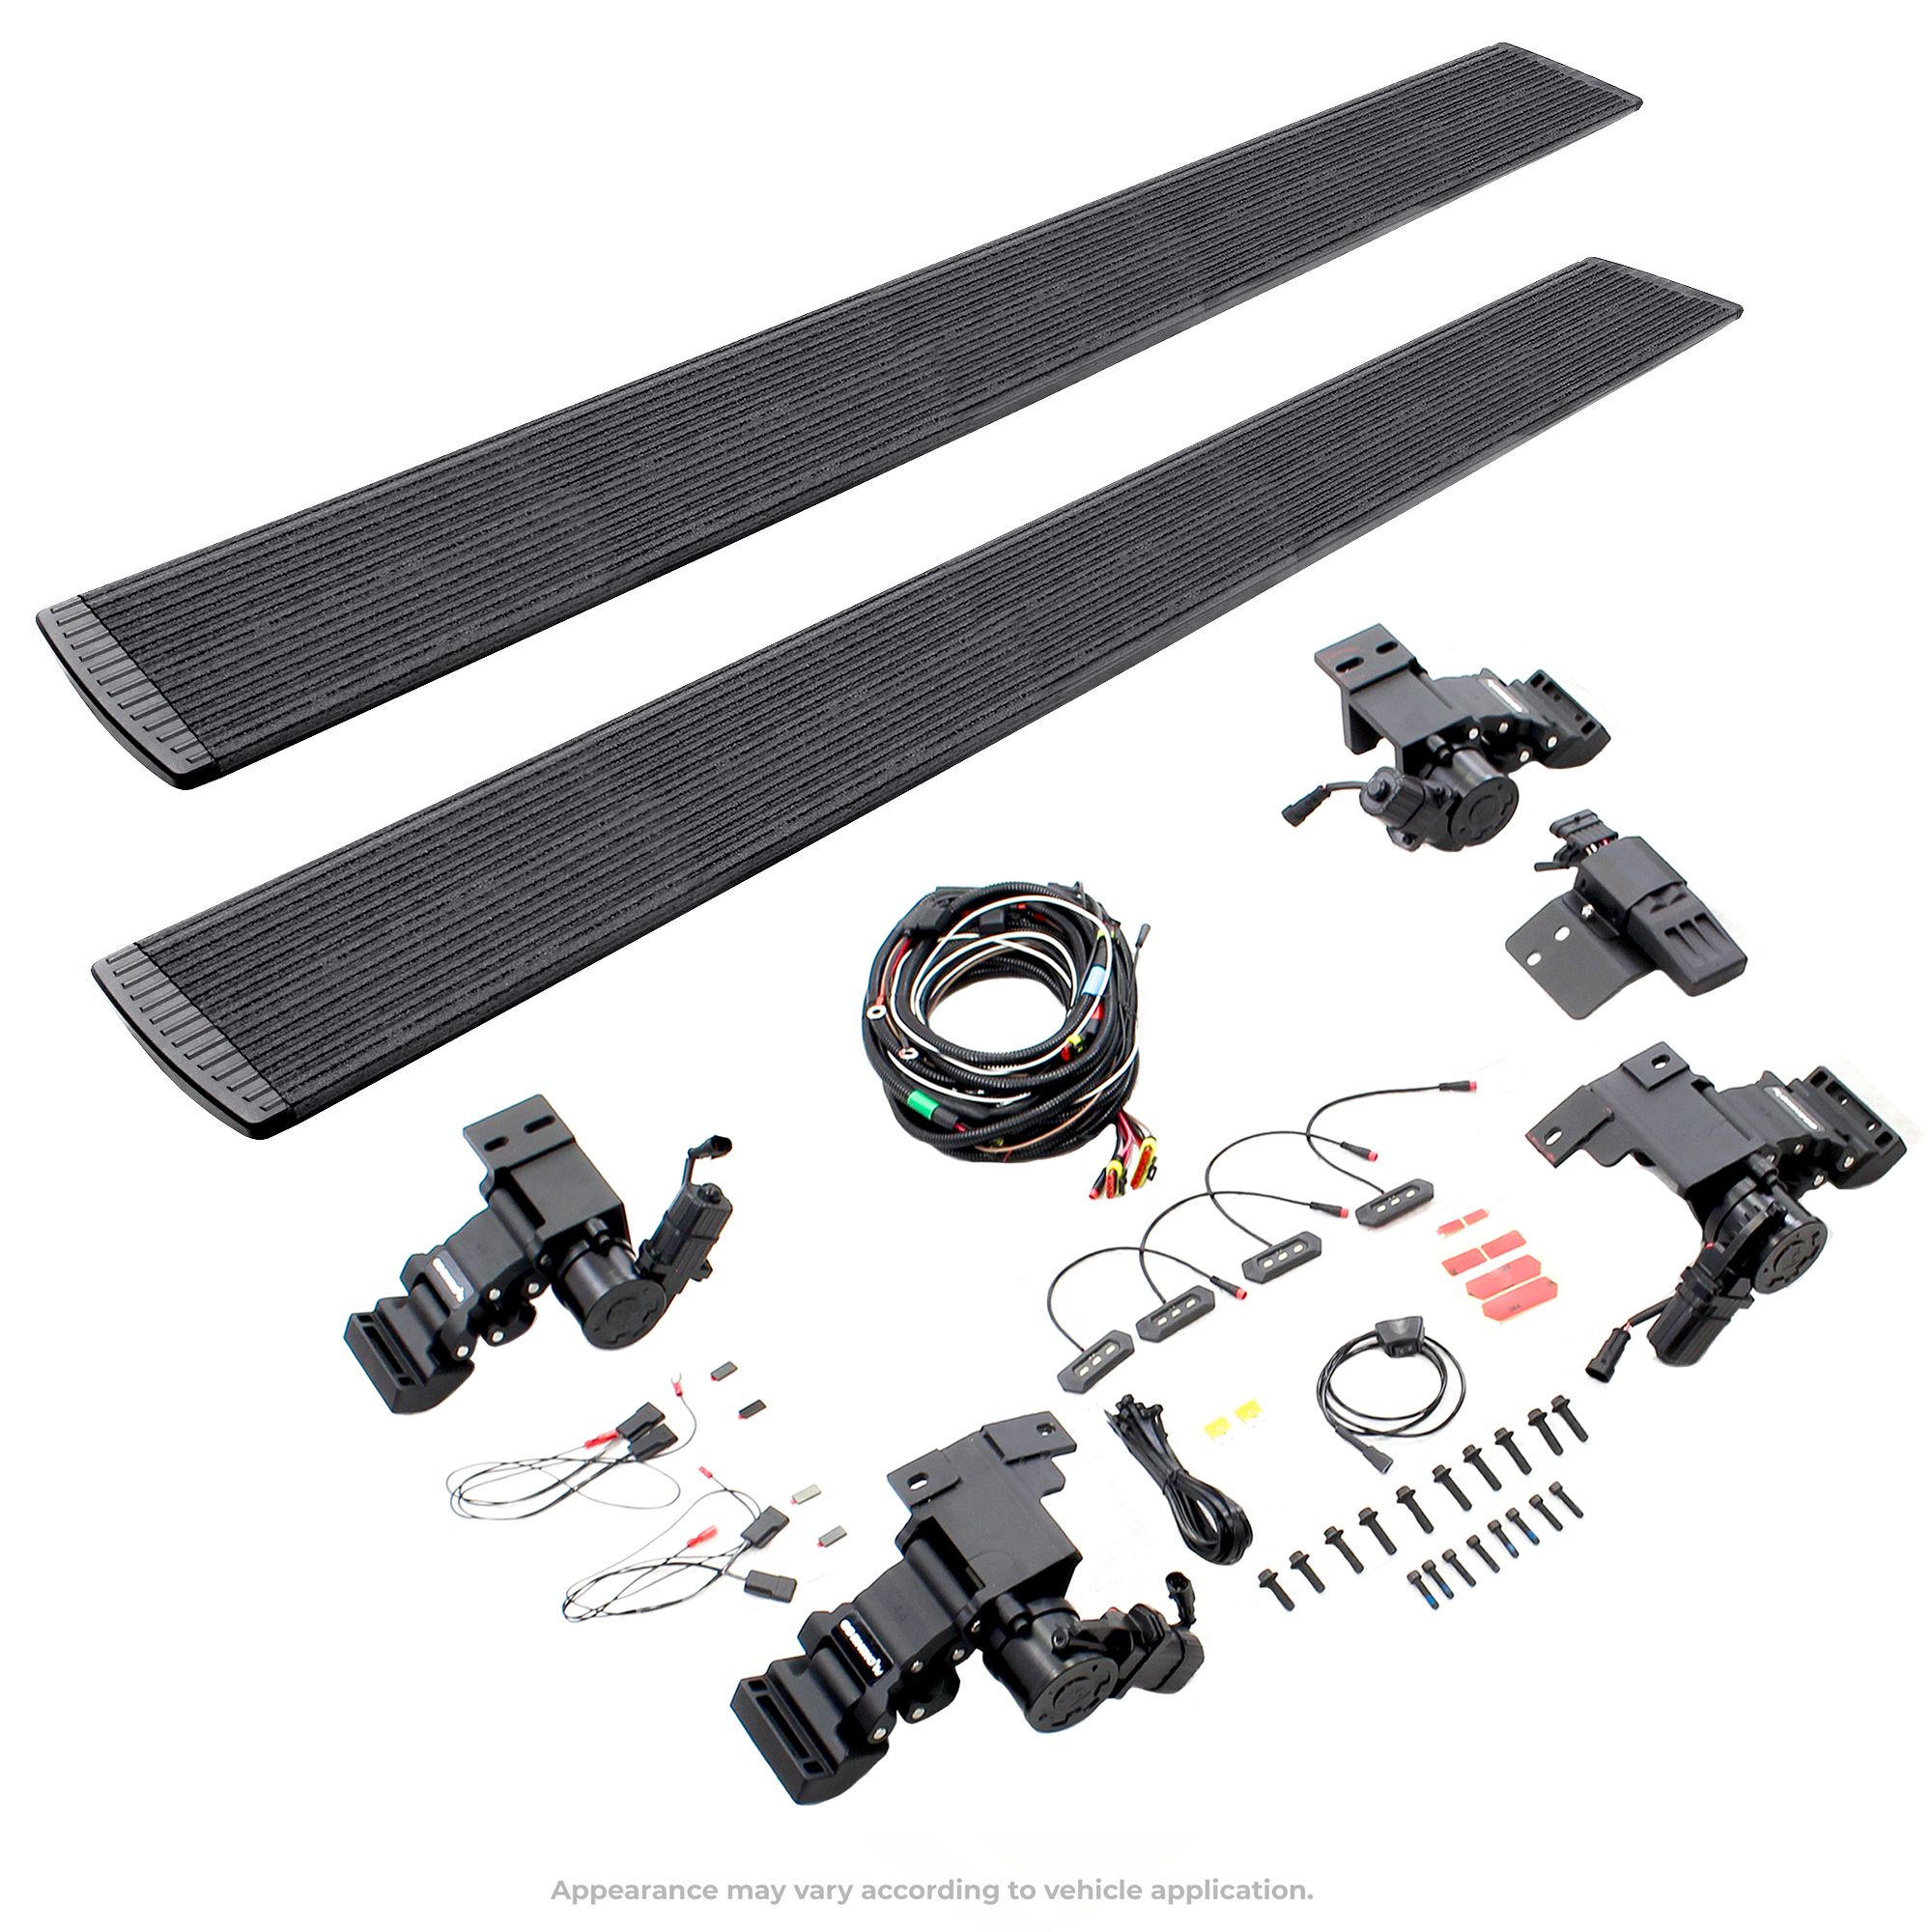 Go Rhino 20404280T - E1 Electric Running Boards With Mounting Brackets - Protective Bedliner Coating